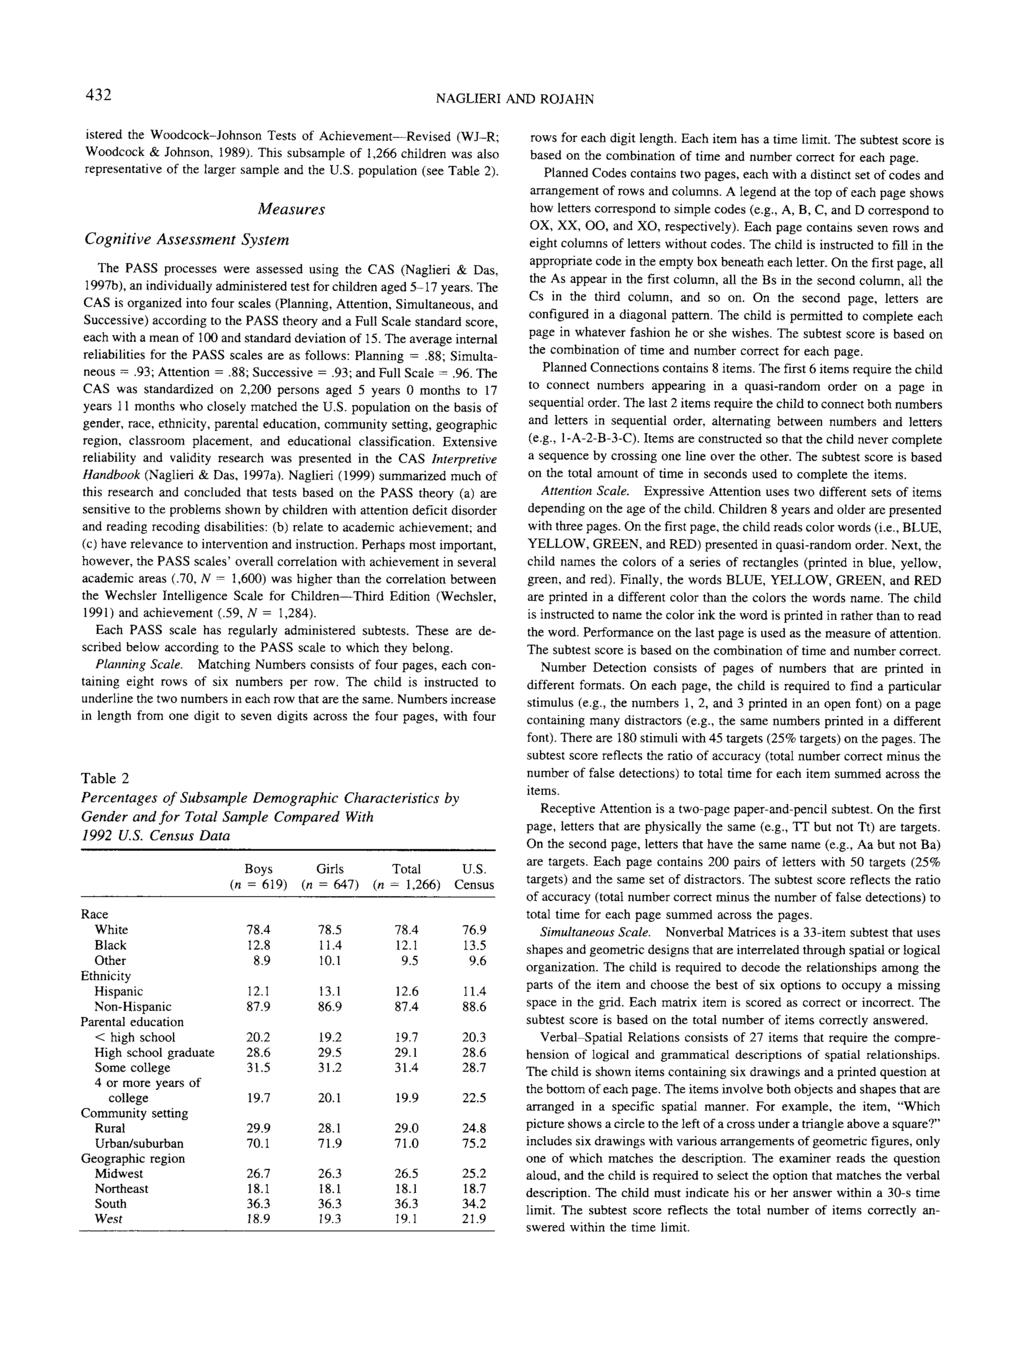 432 NAGLIERI AND ROJAHN istered the Woodcock-Johso Tests of Achievemet Revised (WJ-R; Woodcock & Johso, 1989). This subsample of 1,266 childre was also represetative of the larger sample ad the U.S.